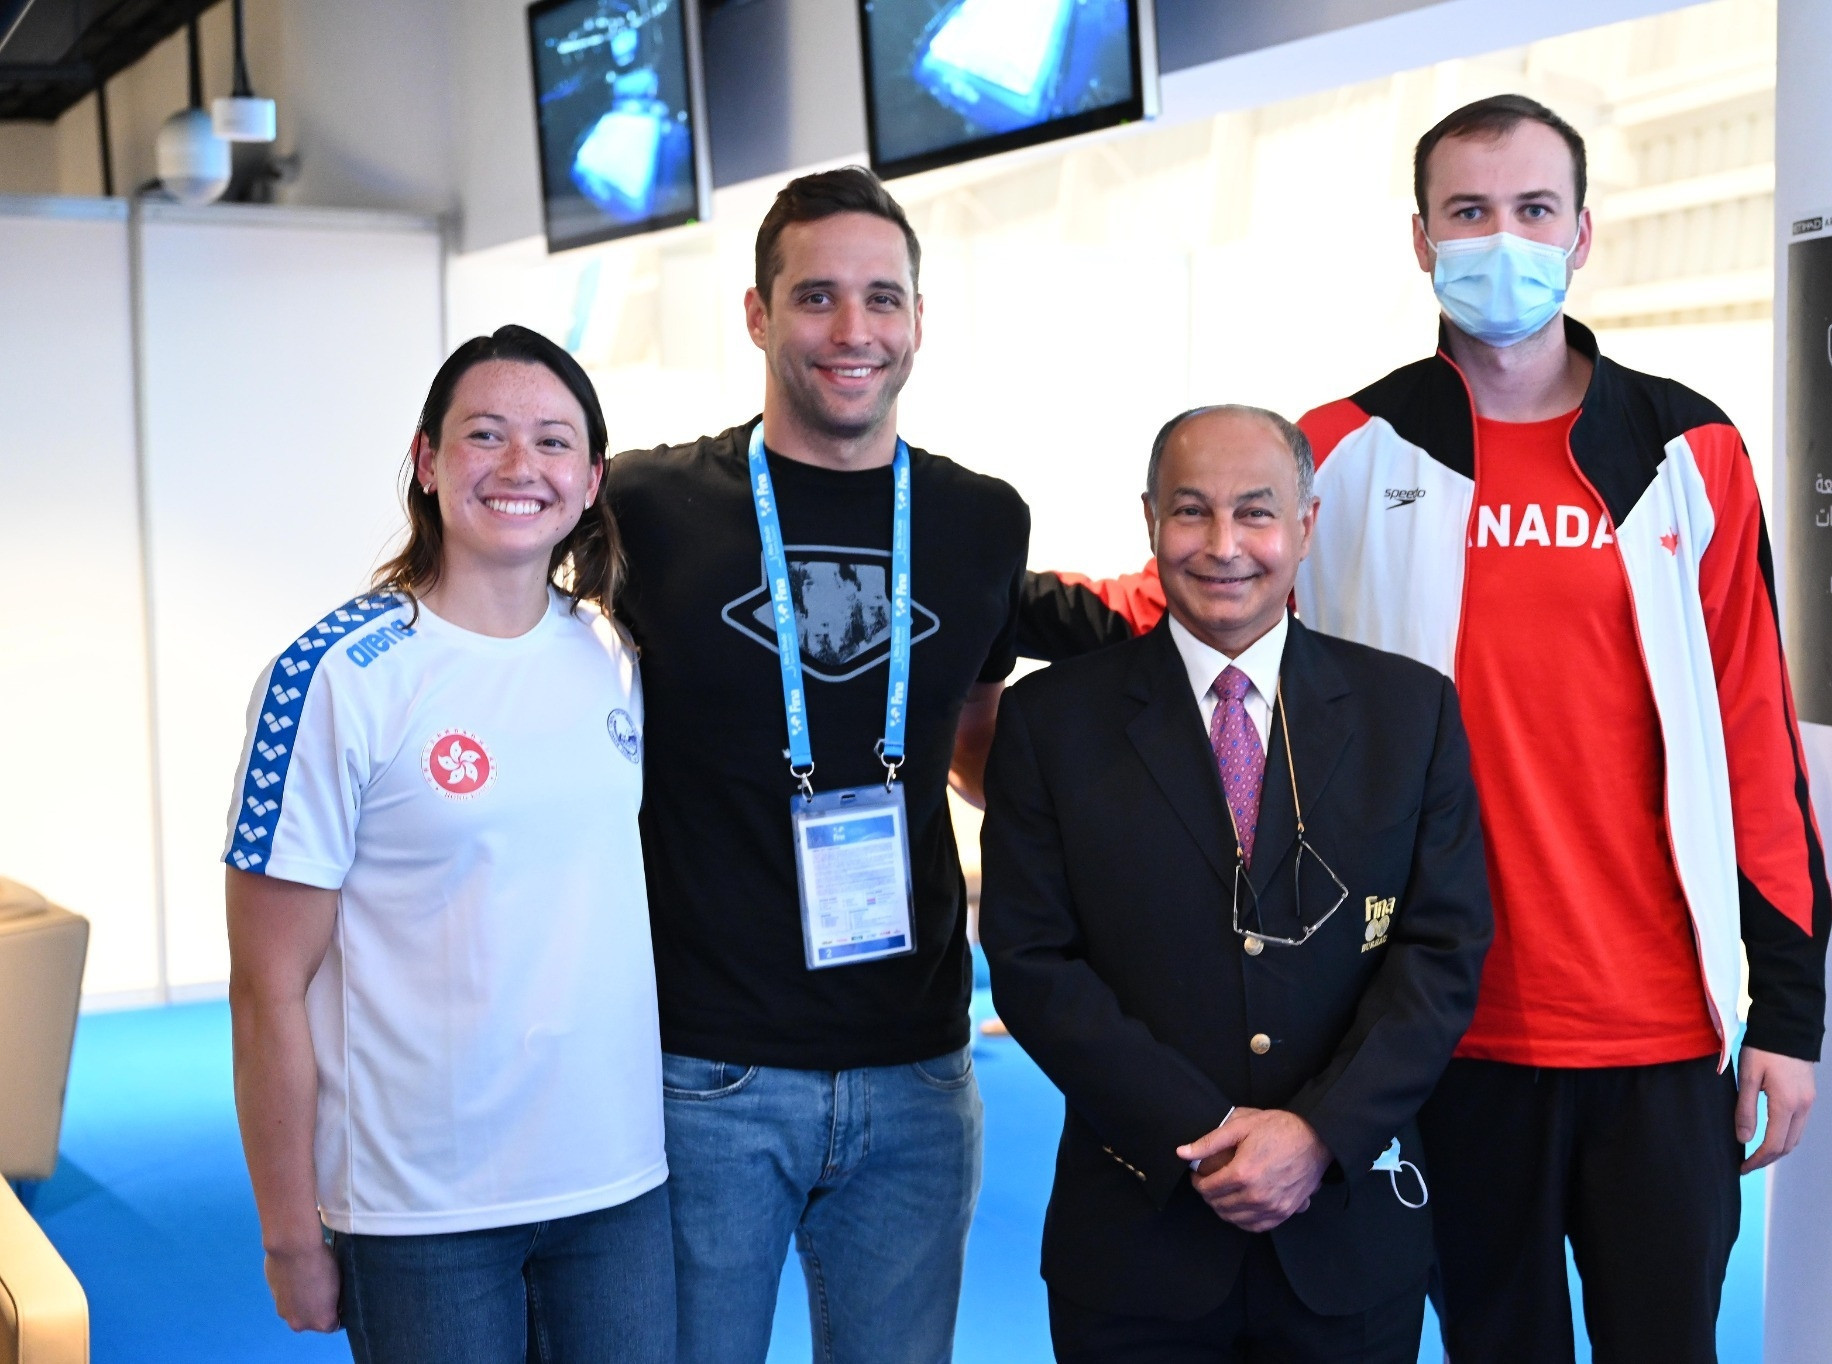 Husain Al-Musallam, second right, with Hong Kong's Siobhán Haughey, left, Chad le Clos of South African, second left, and Canadian Yuri Kisil ©FINA